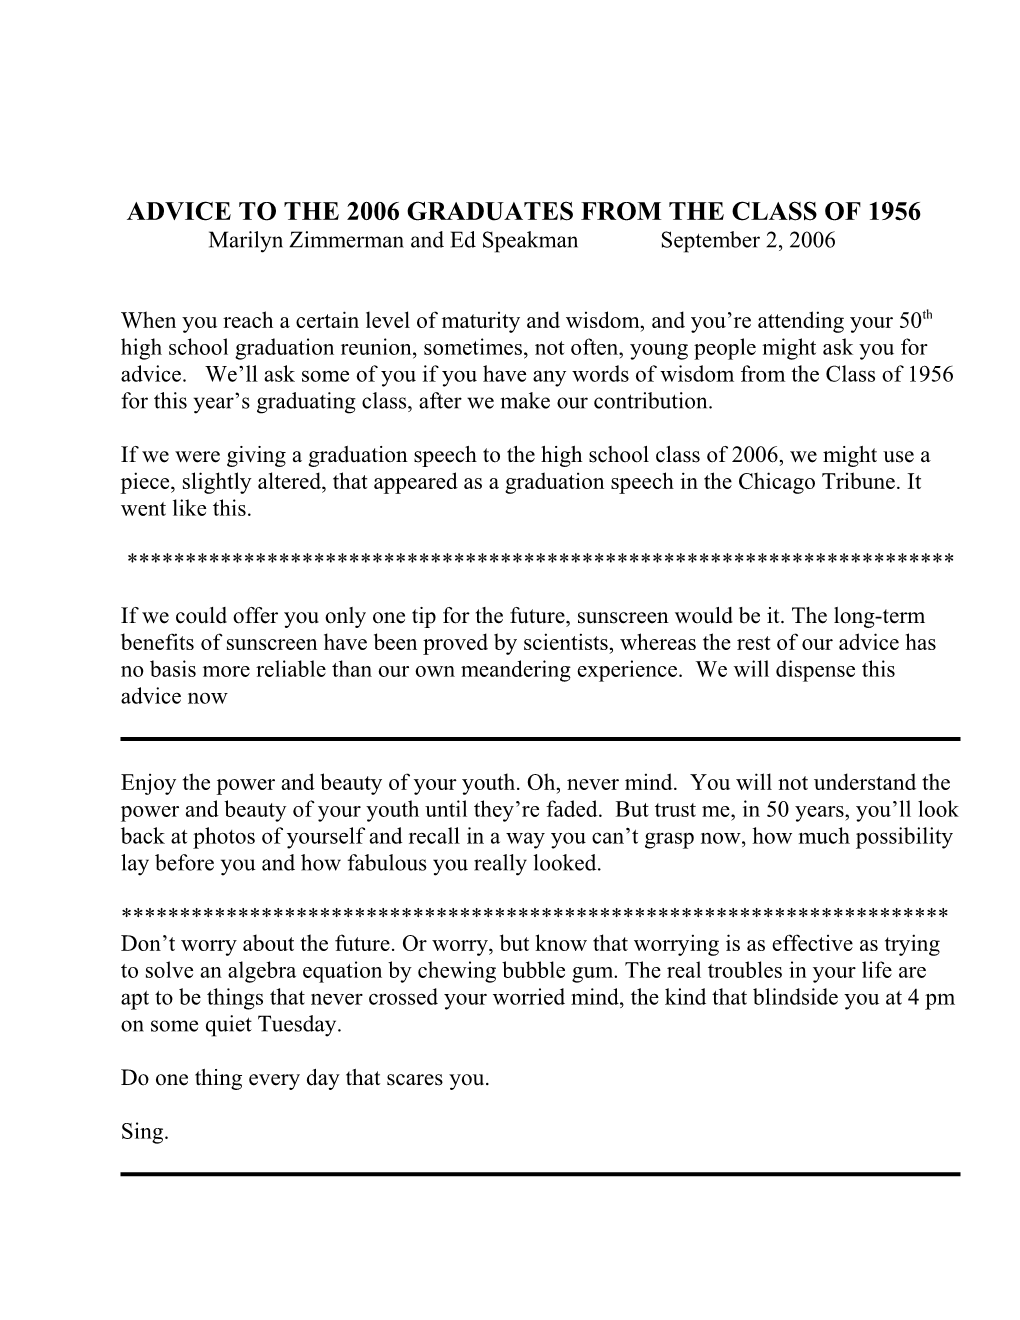 Advice to the 2006 Graduates from the Class of 1956